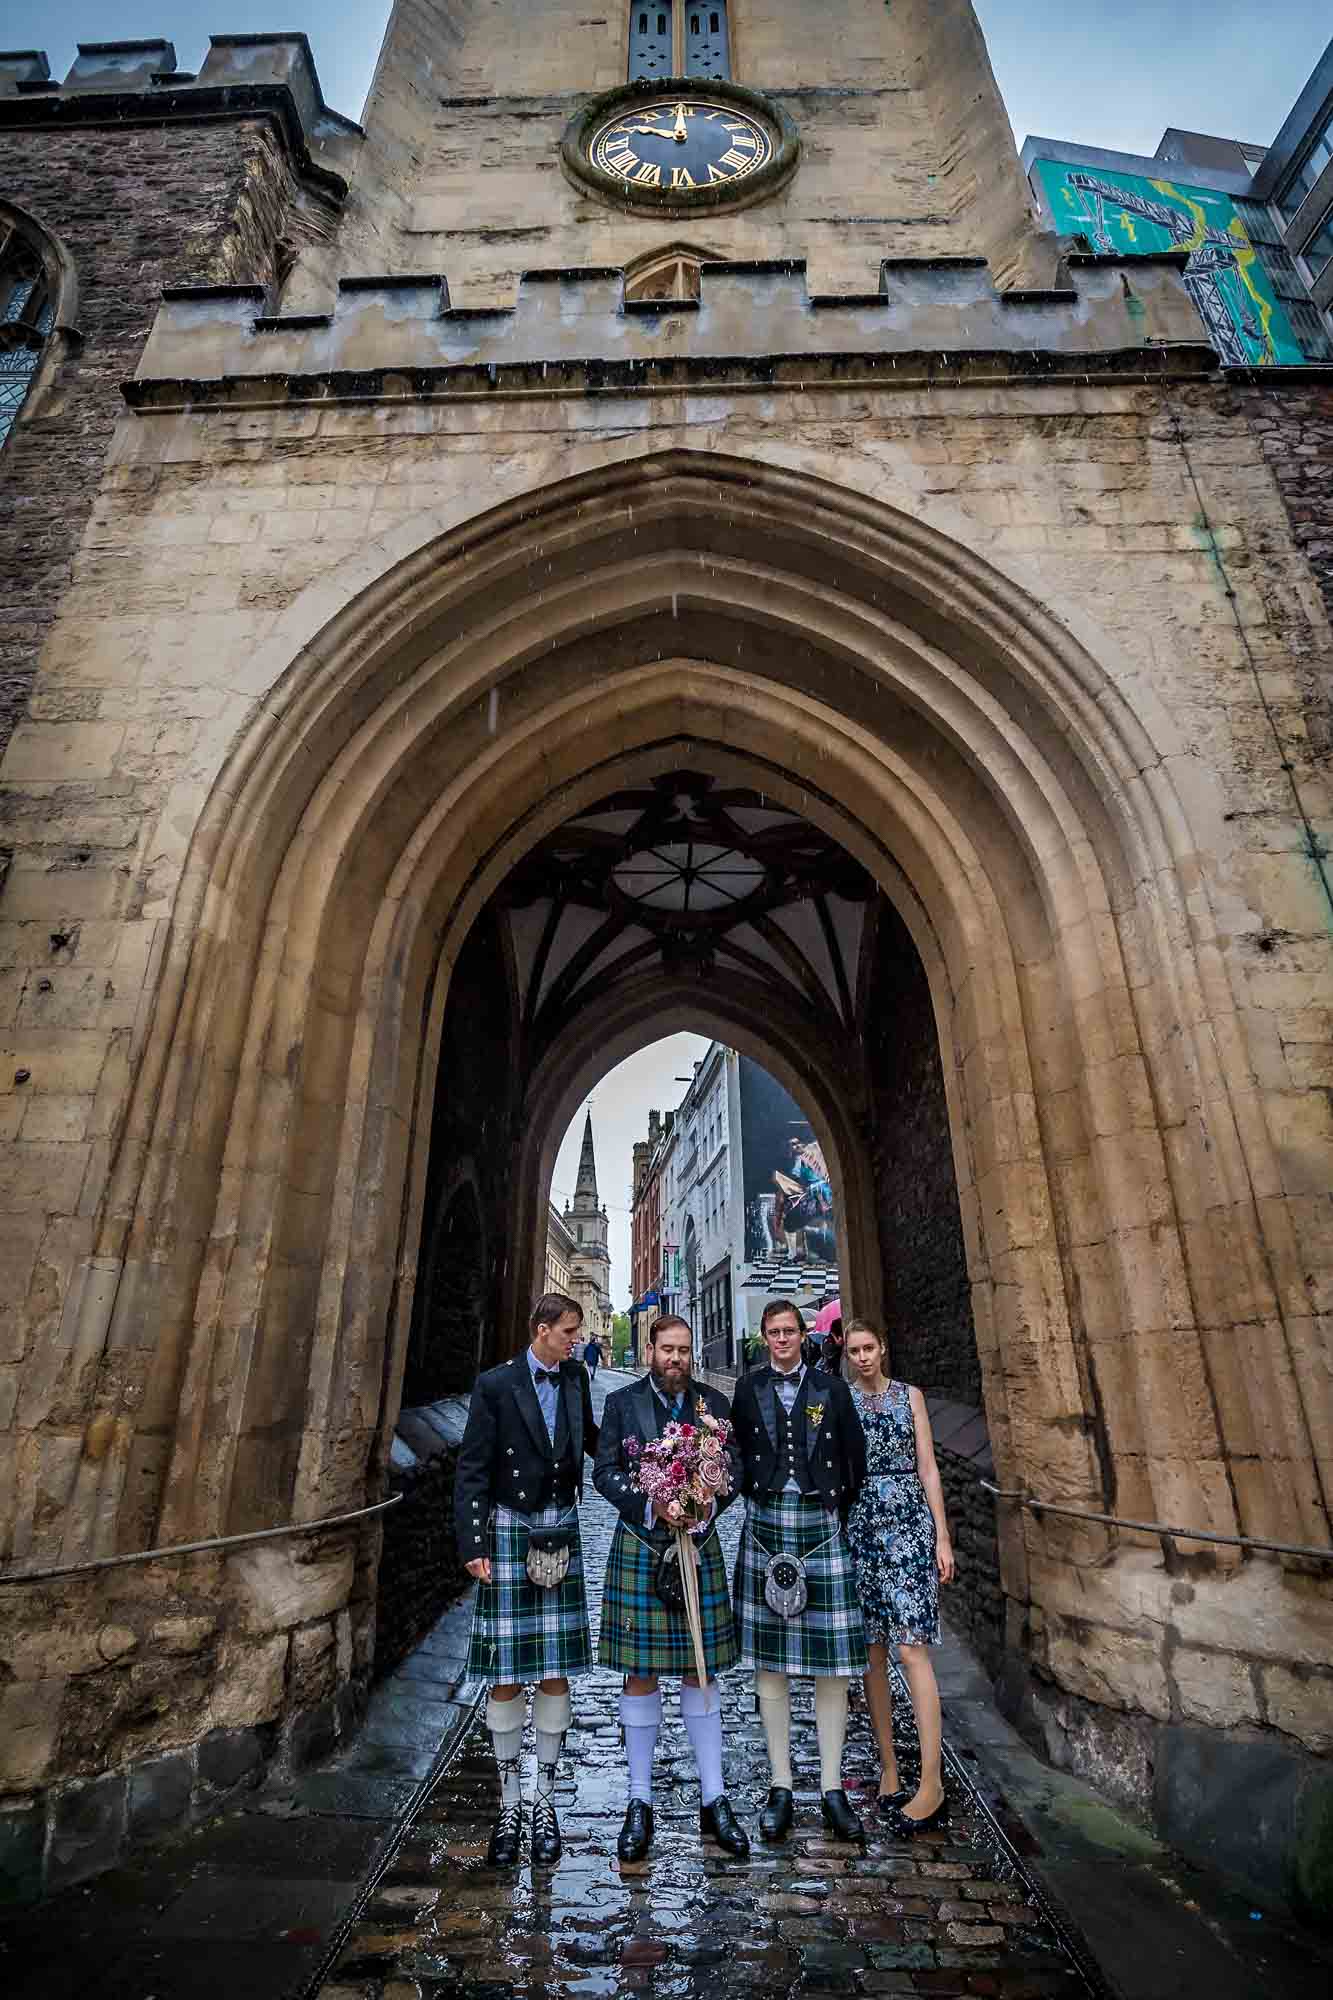 The kilted groom and best man and others under St John on the Wall's Church Clock Tower Arch in Bristol